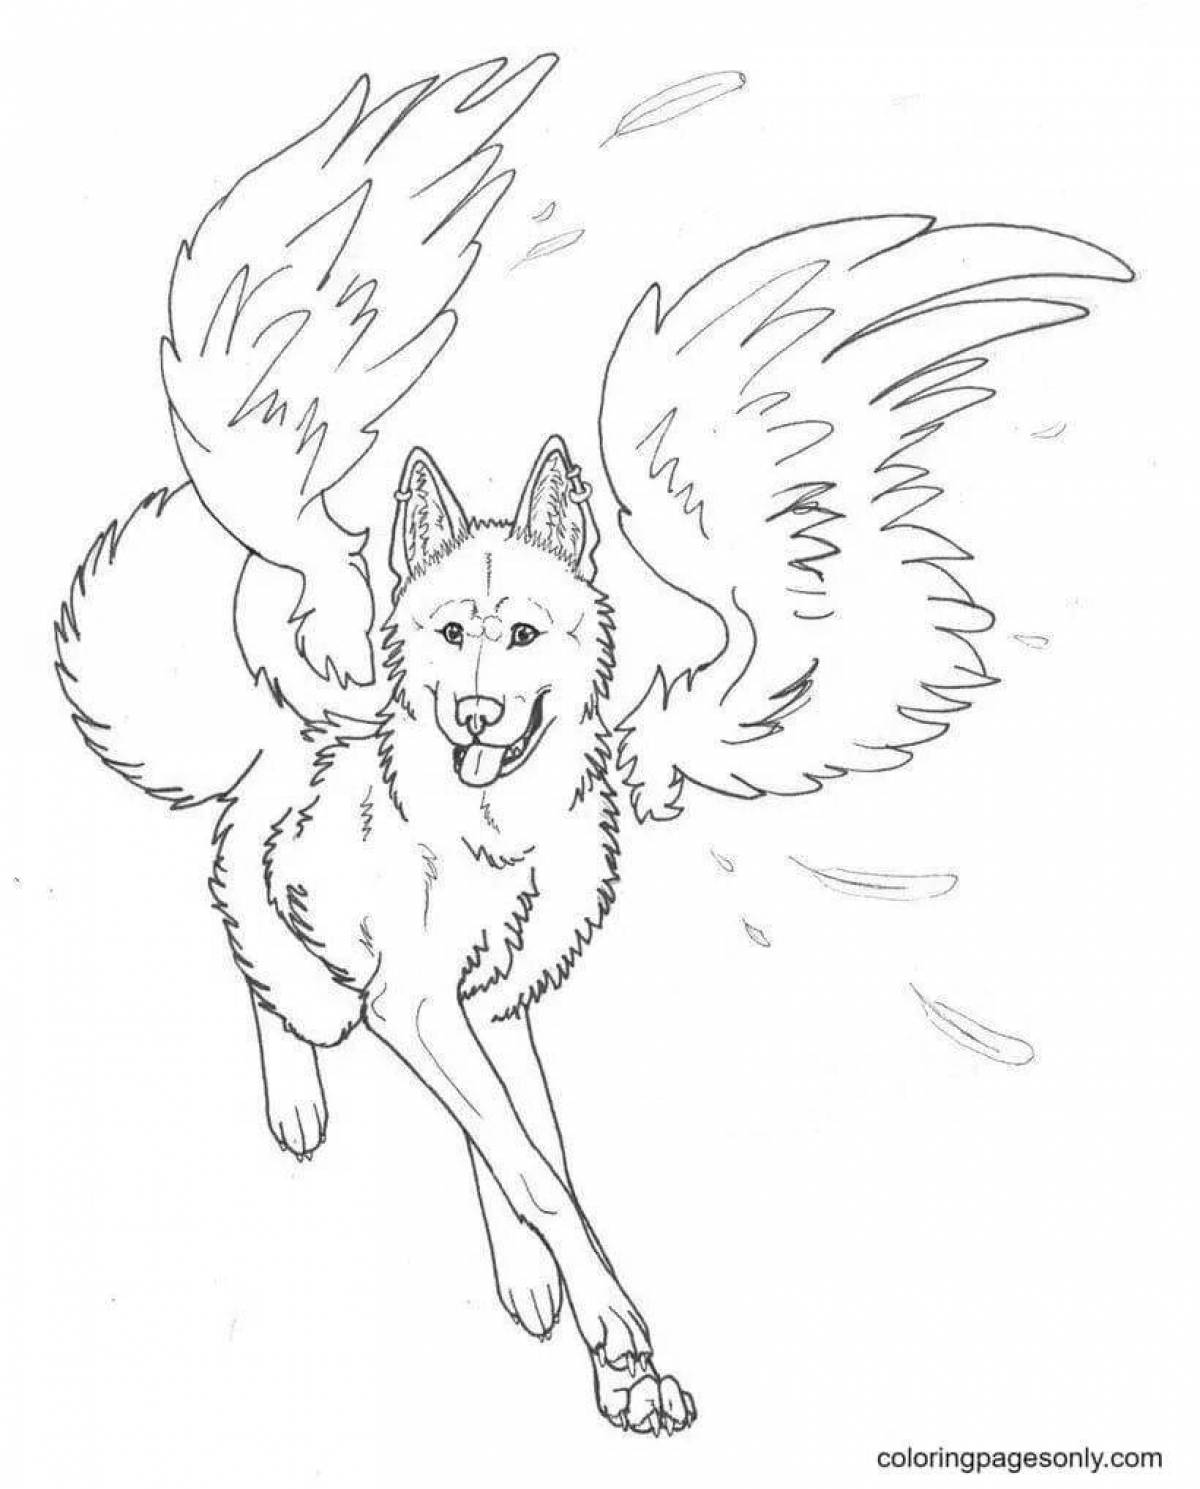 Wolf with wings #6